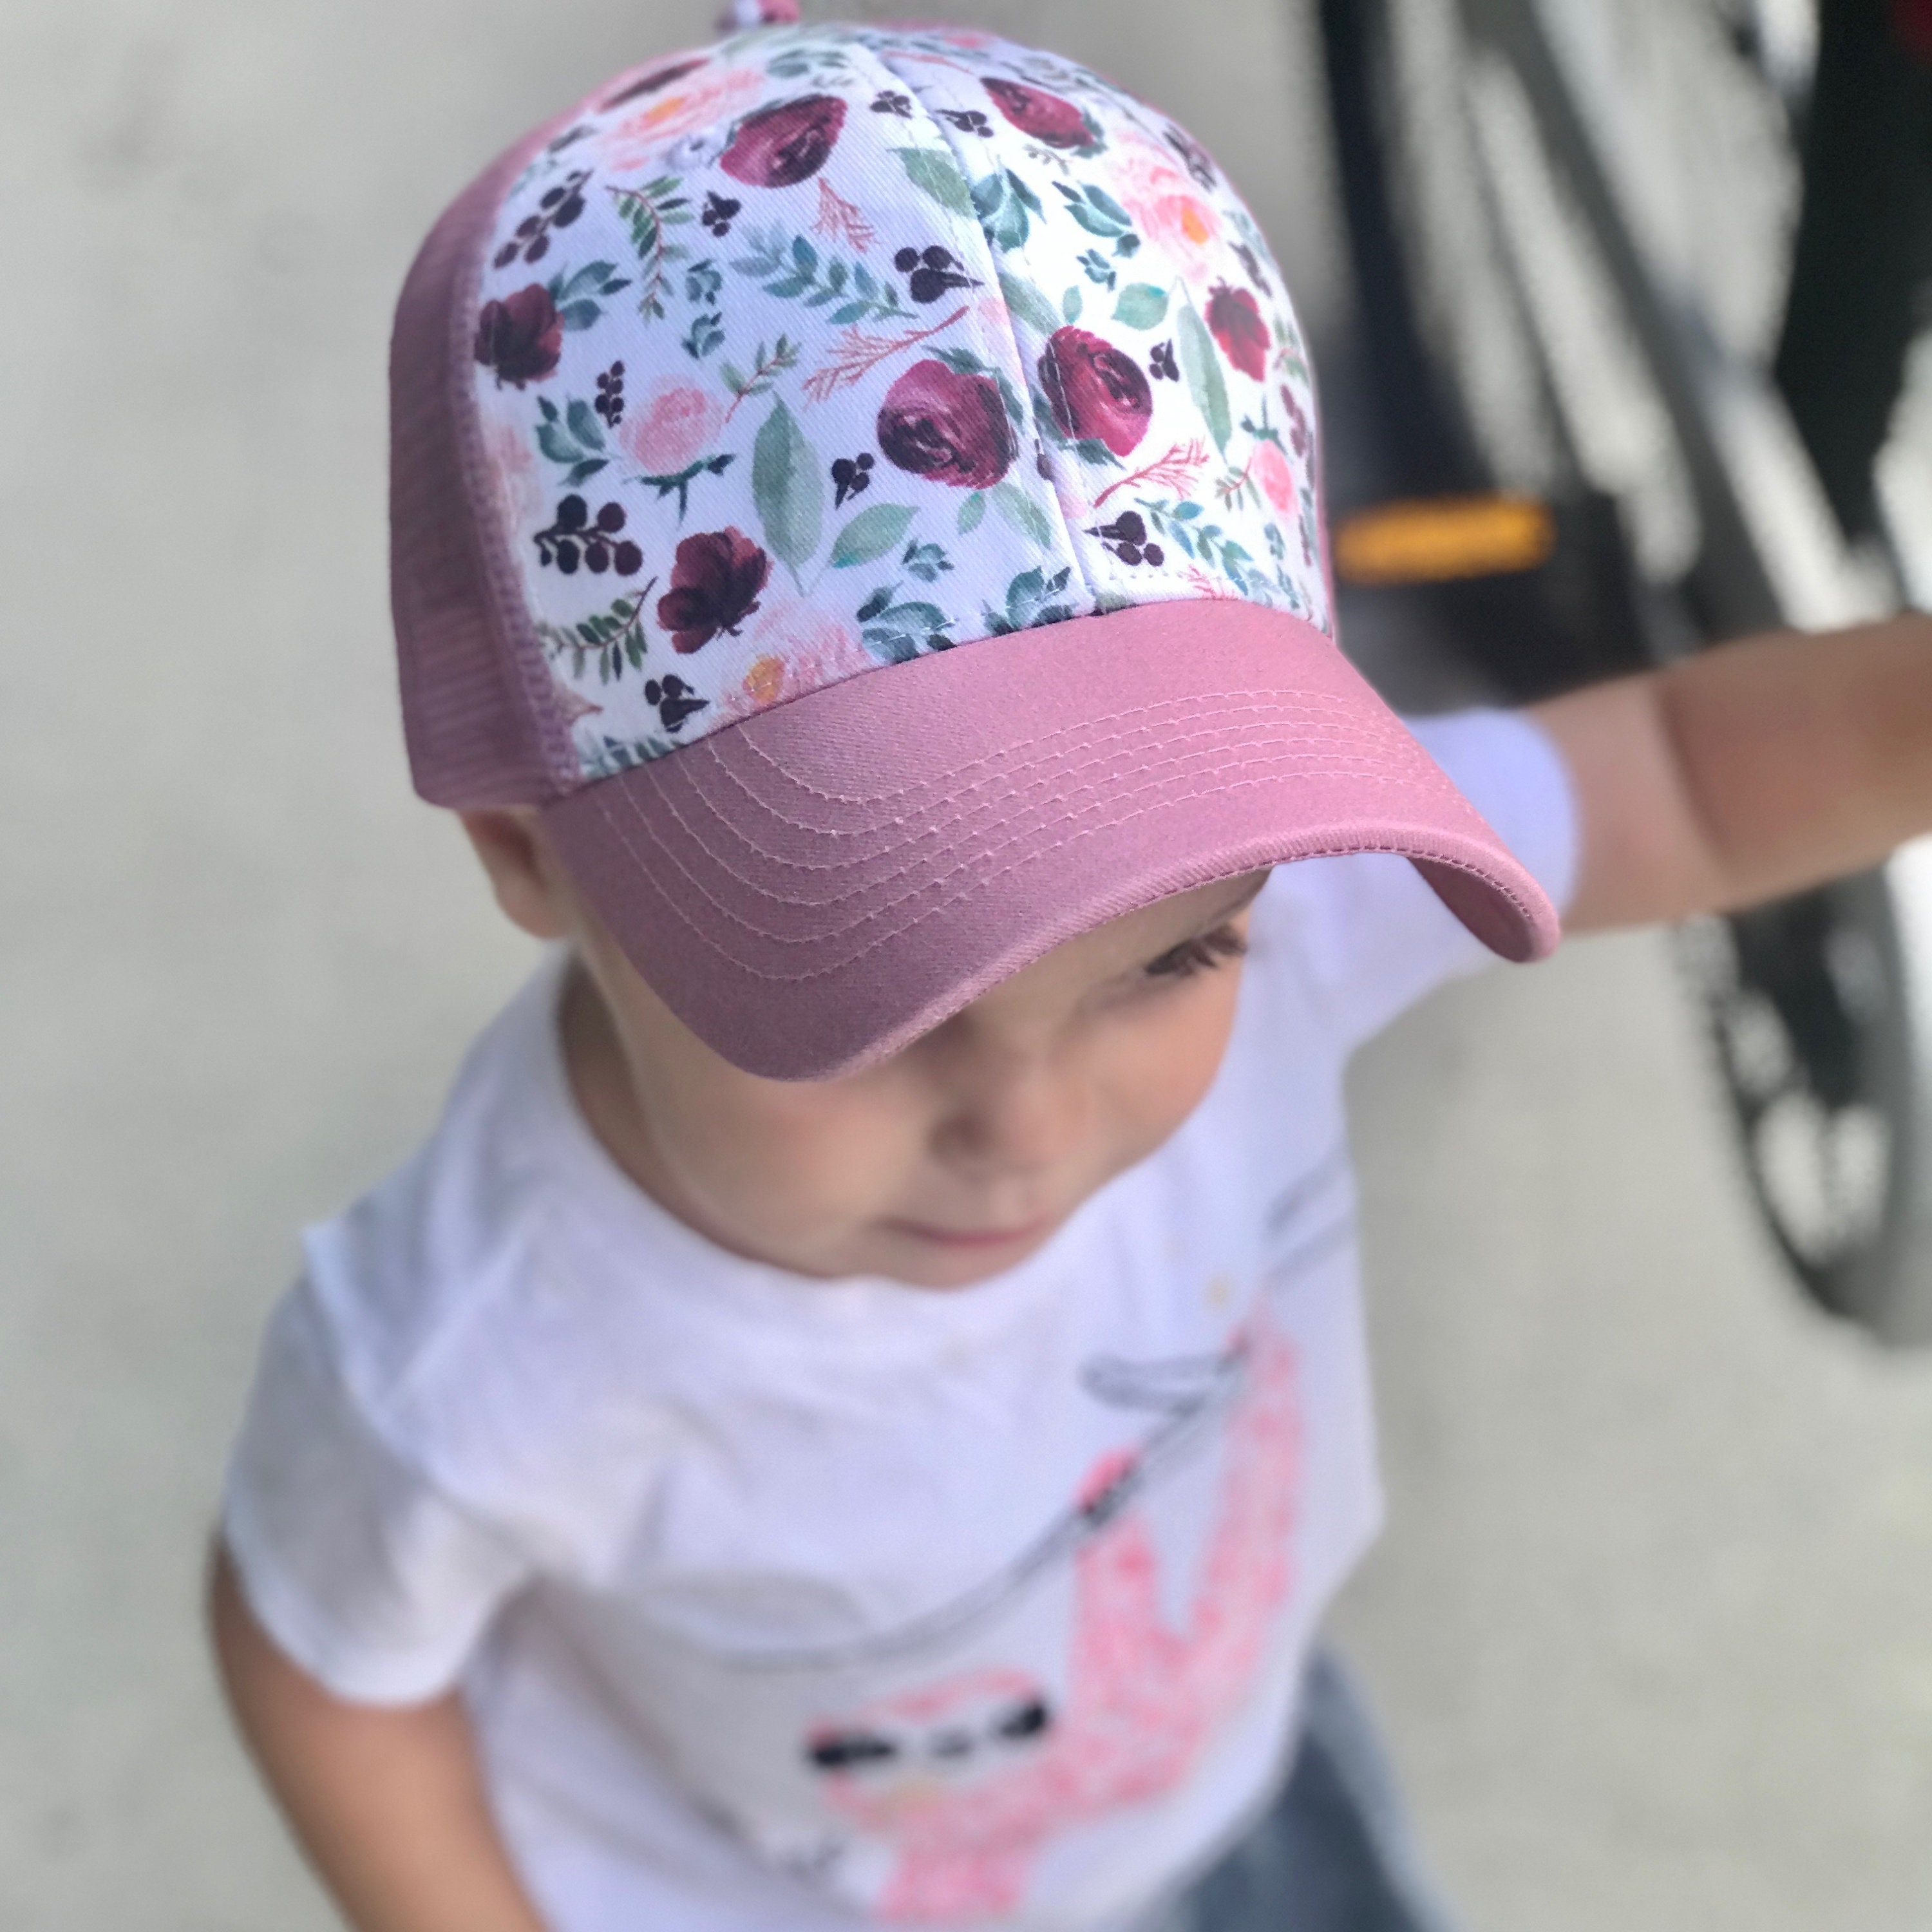 Marble Dyed Child Toddler Trucker hat, Hydro dipped trucker hat for kids,  blues and teal